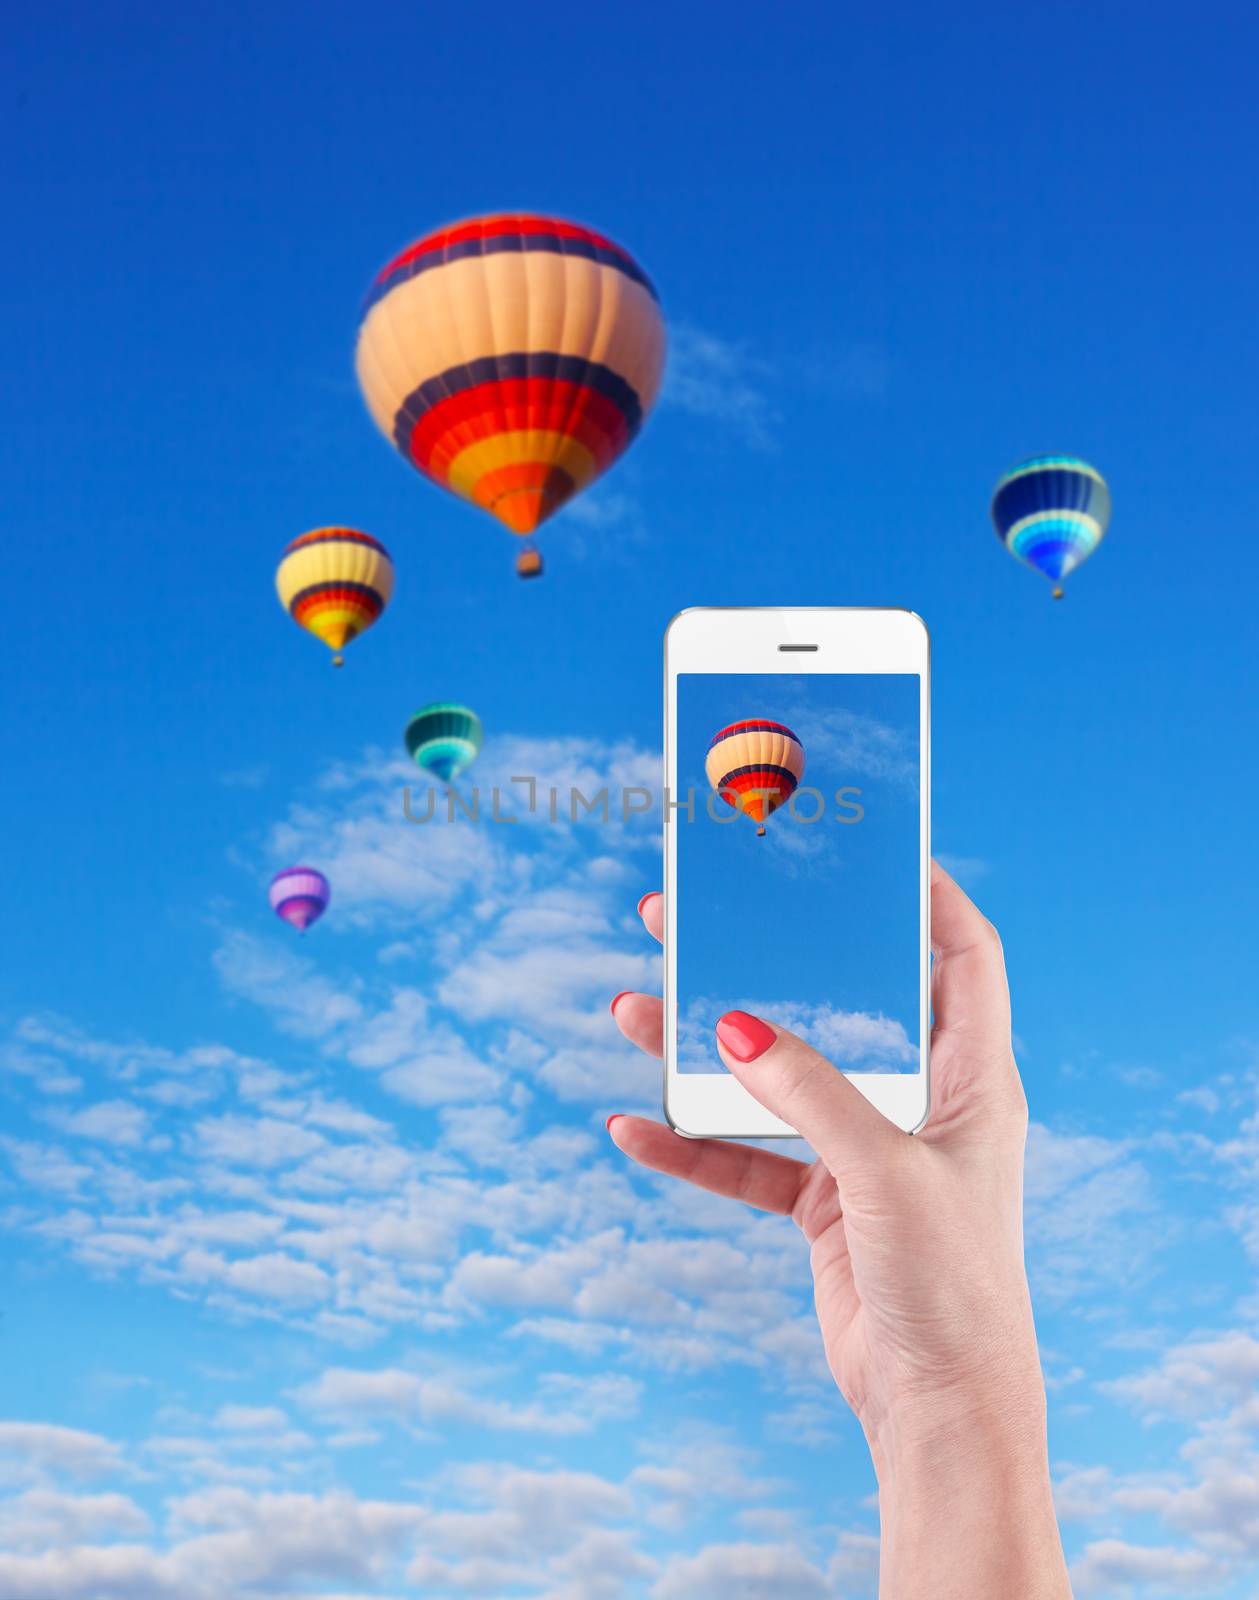 Female Hands Holding Smart Phone Displaying Photo of Blue Sky with Hot Air Balloons Behind.